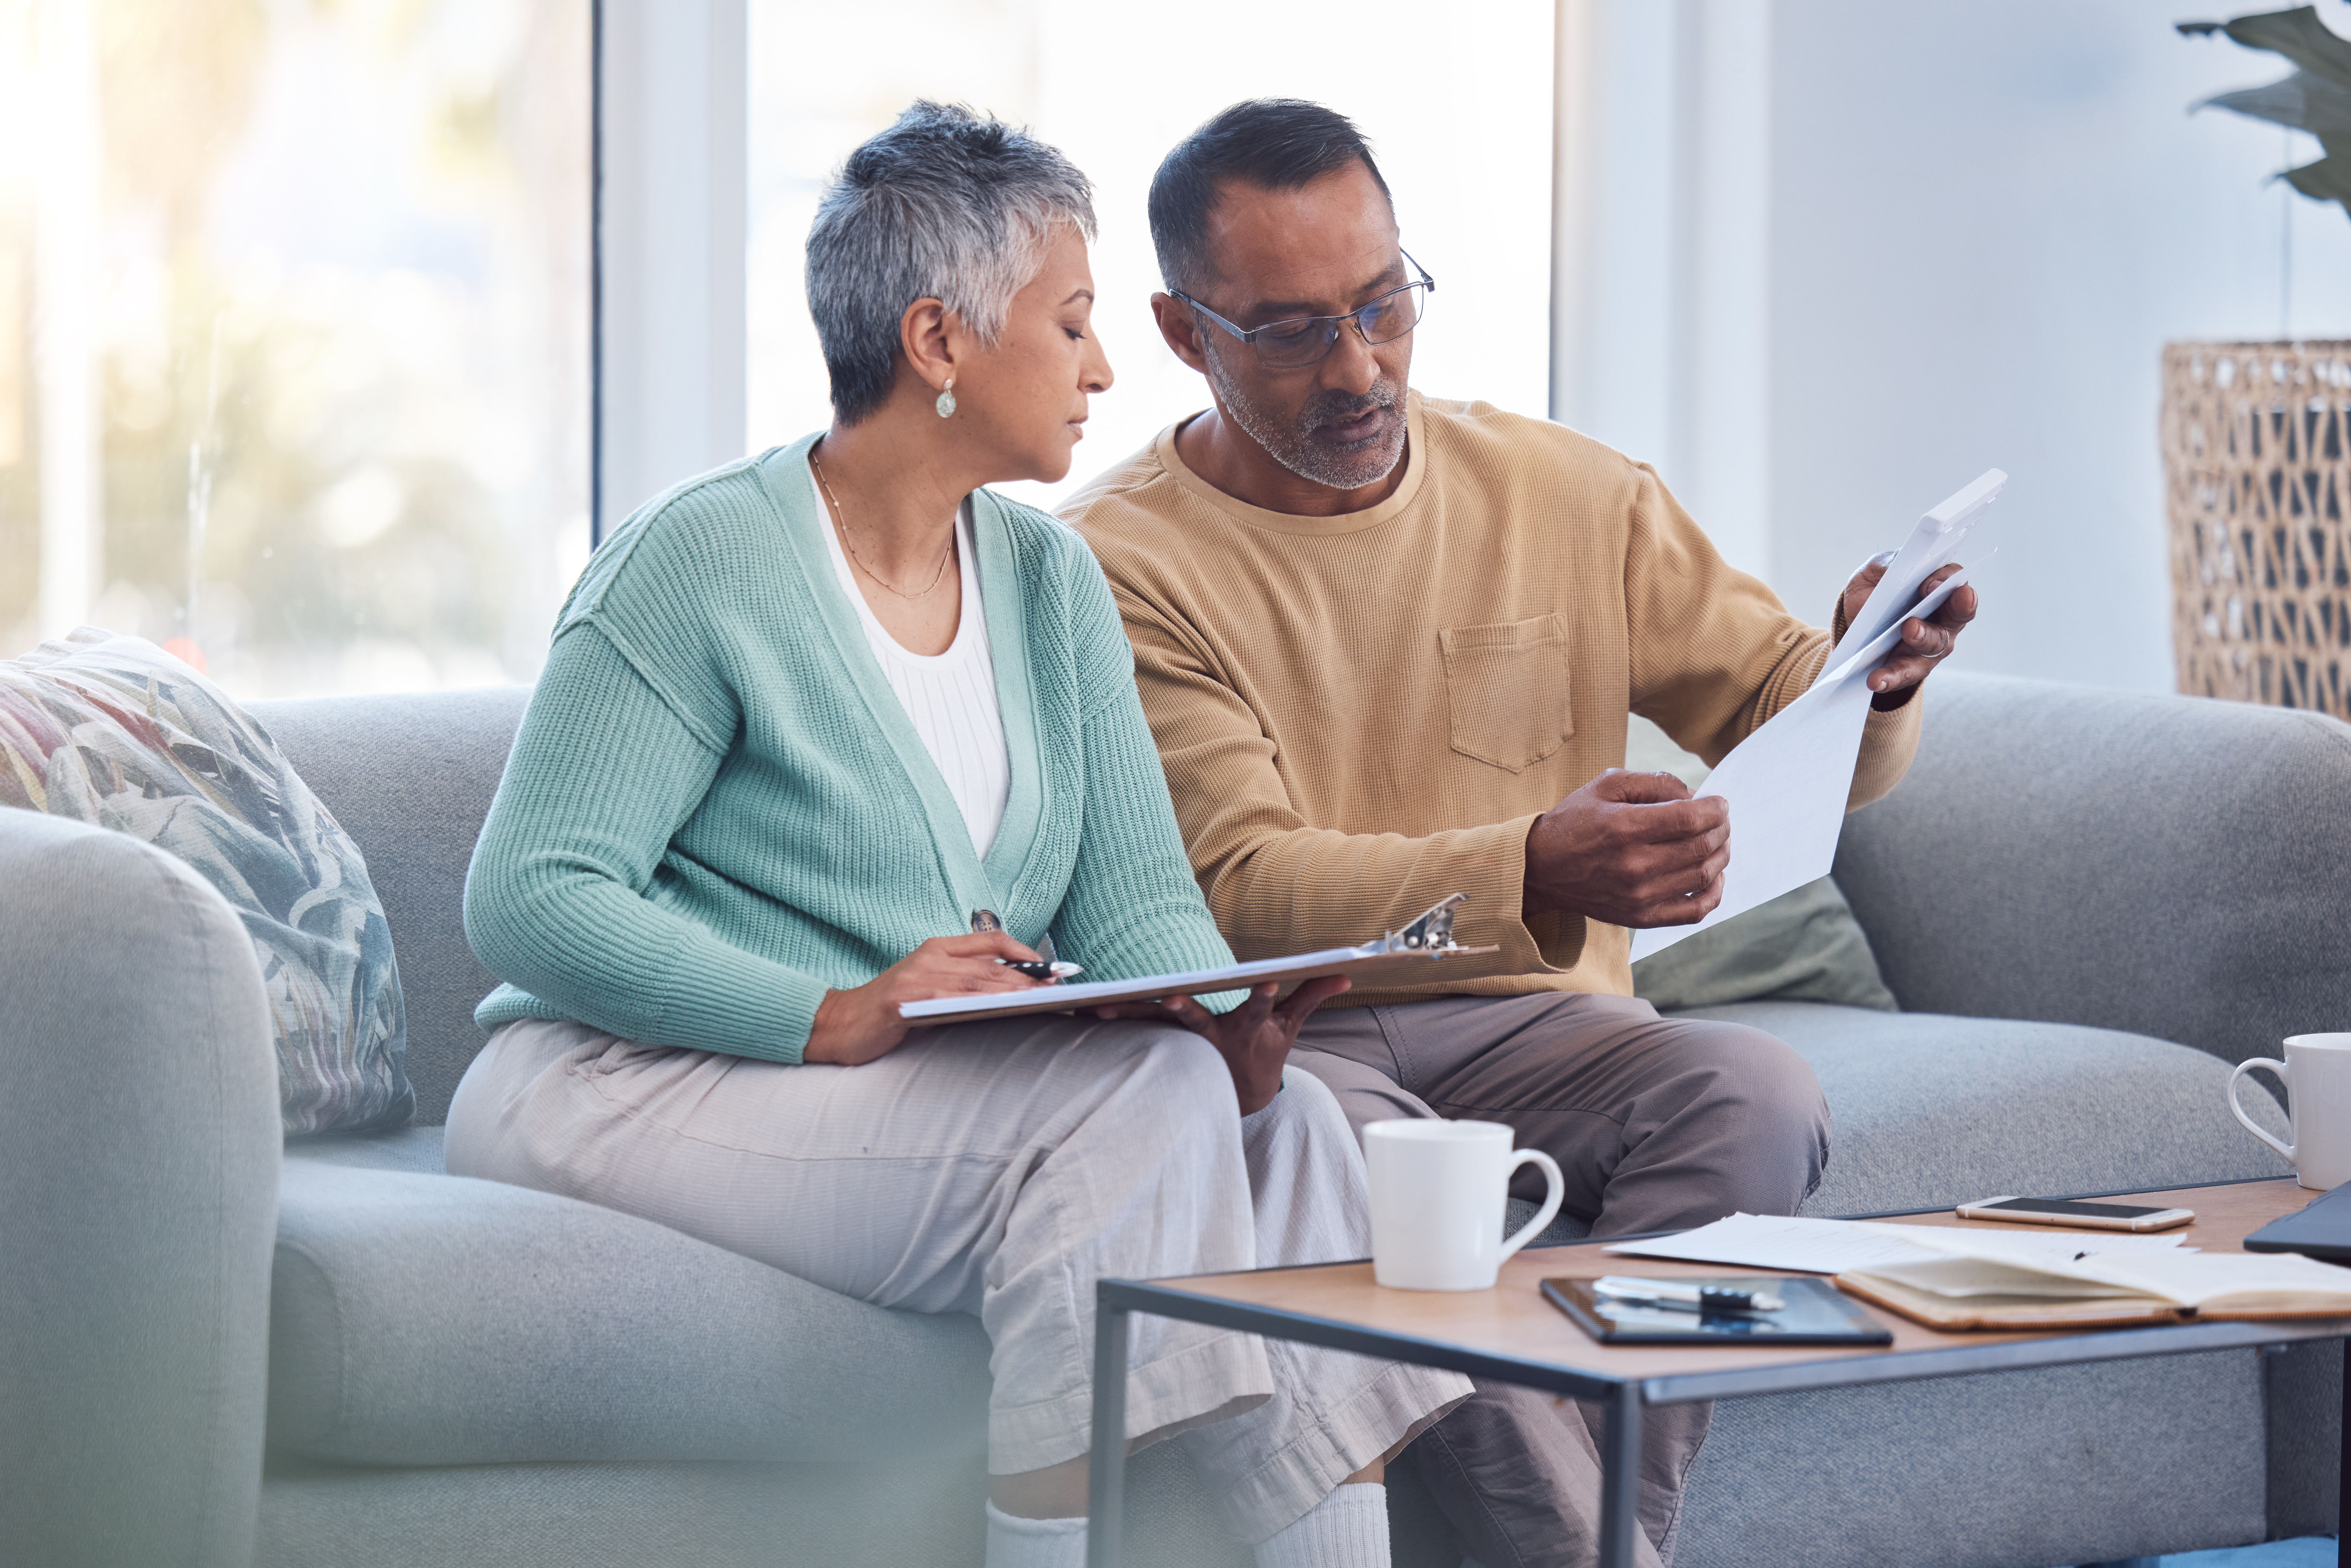 Estimating Your Retirement Income Needs